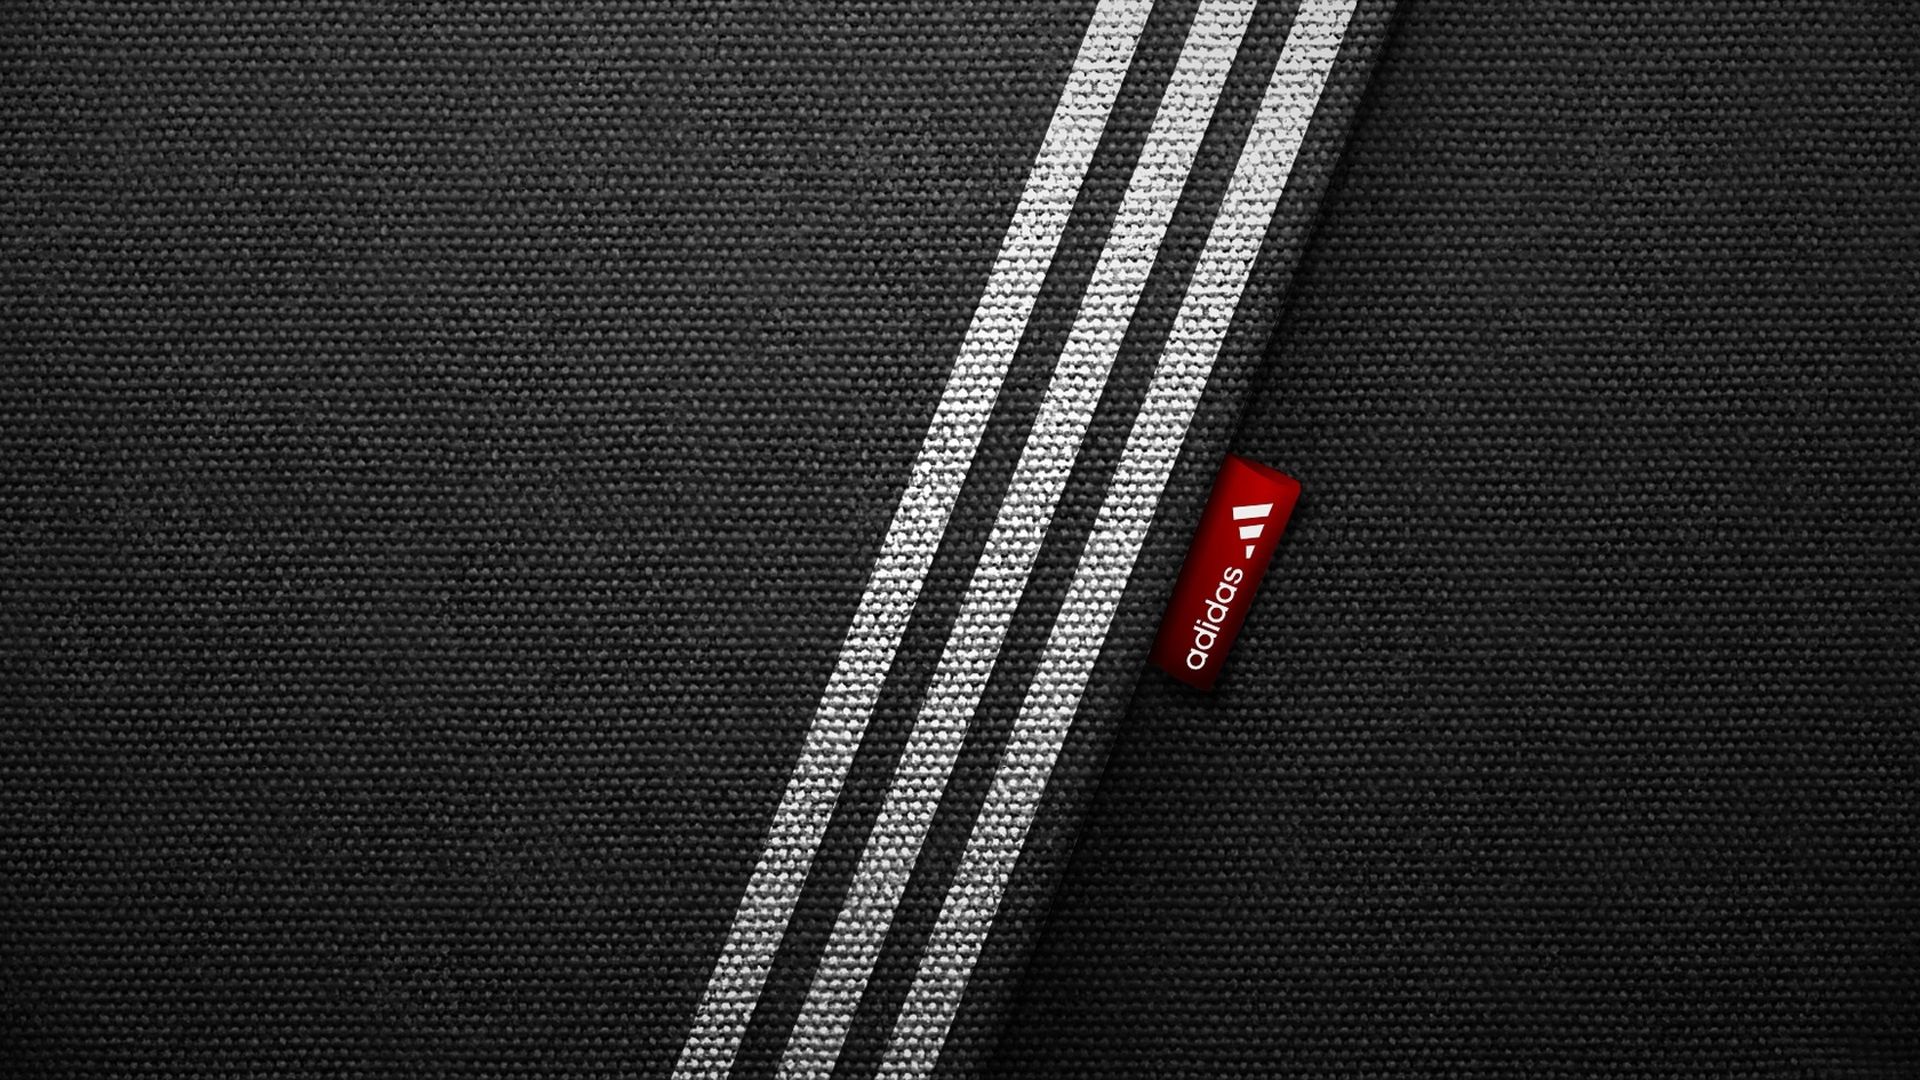 adidas wallpapers impossible is nothing